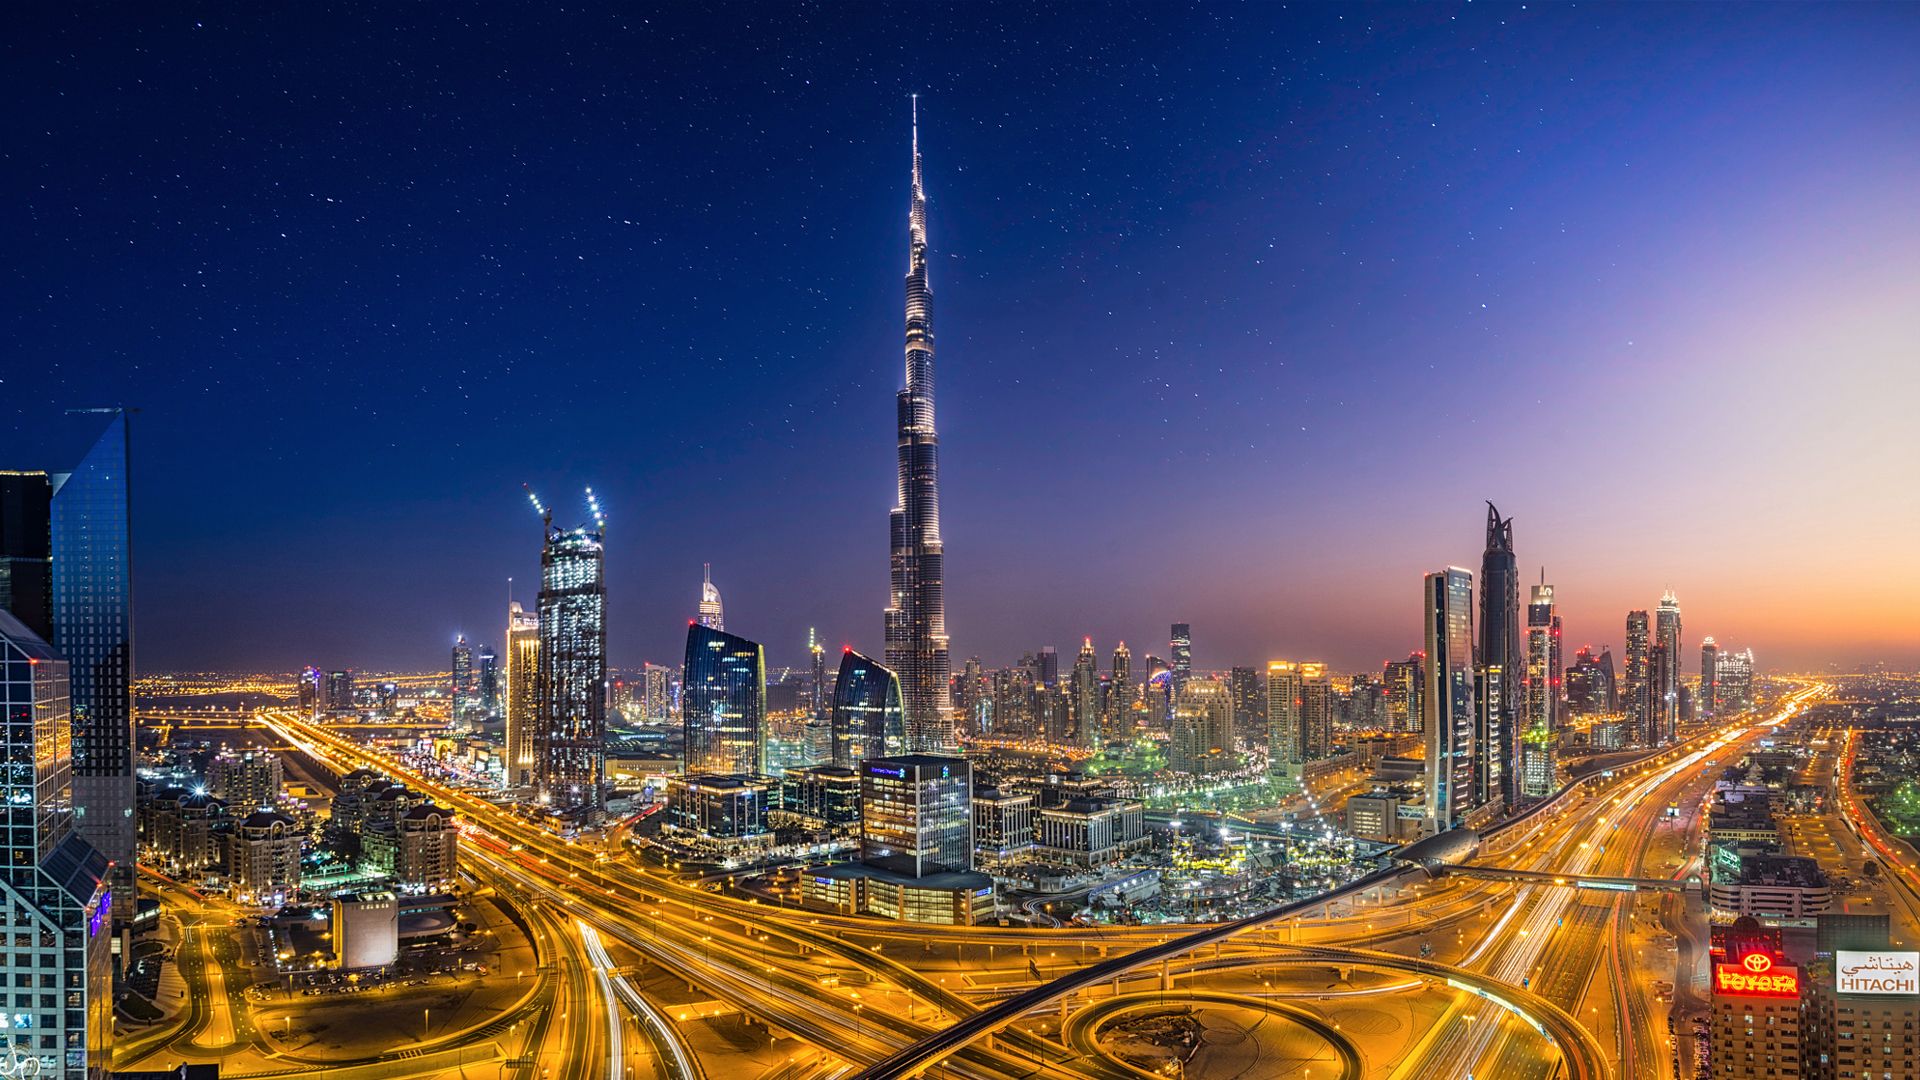 Dubai is one of the most famous cities in the world, and for good reason. - Dubai